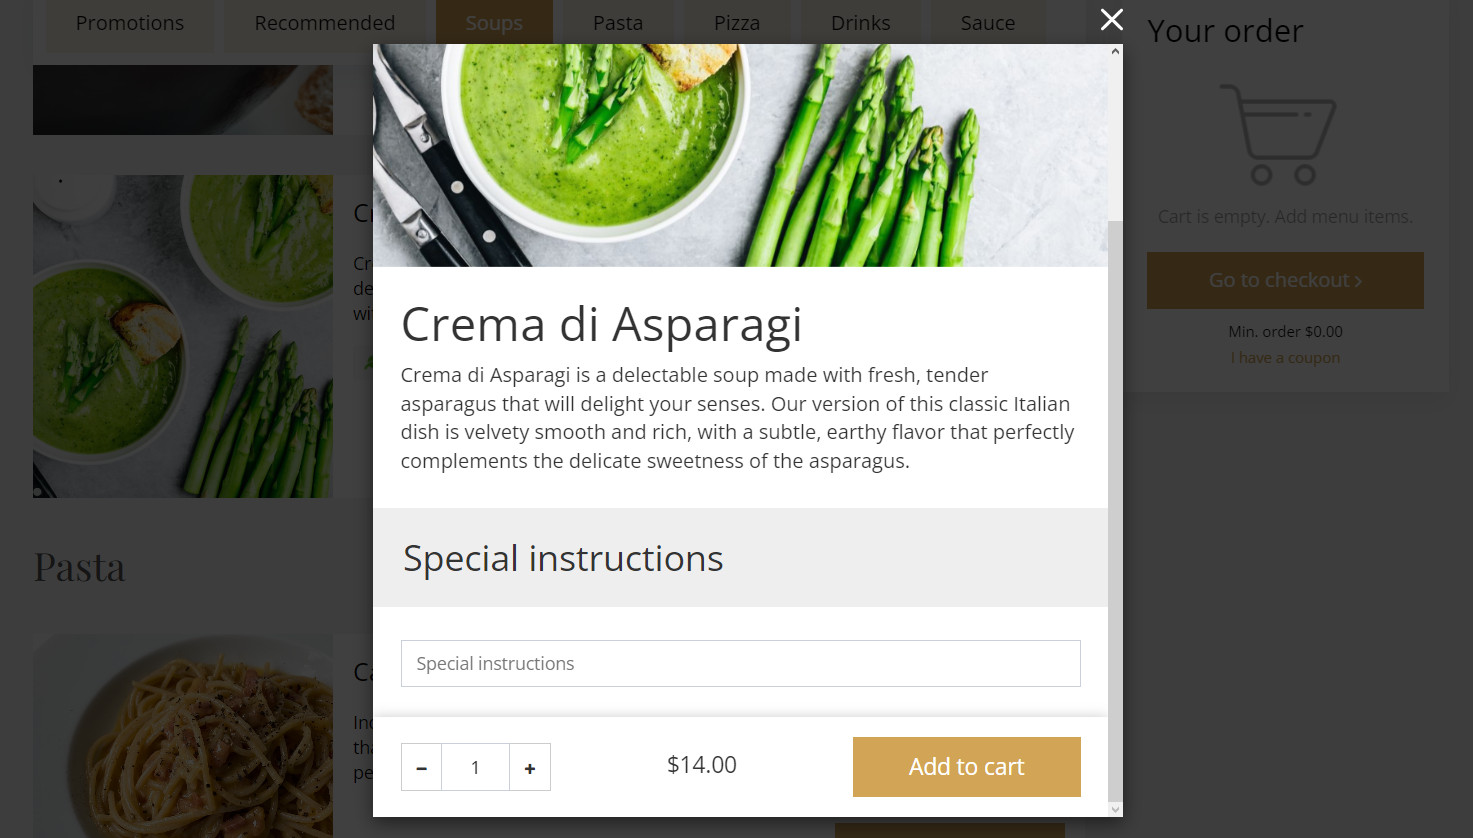  An example of an ordering instruction section in UpMenu